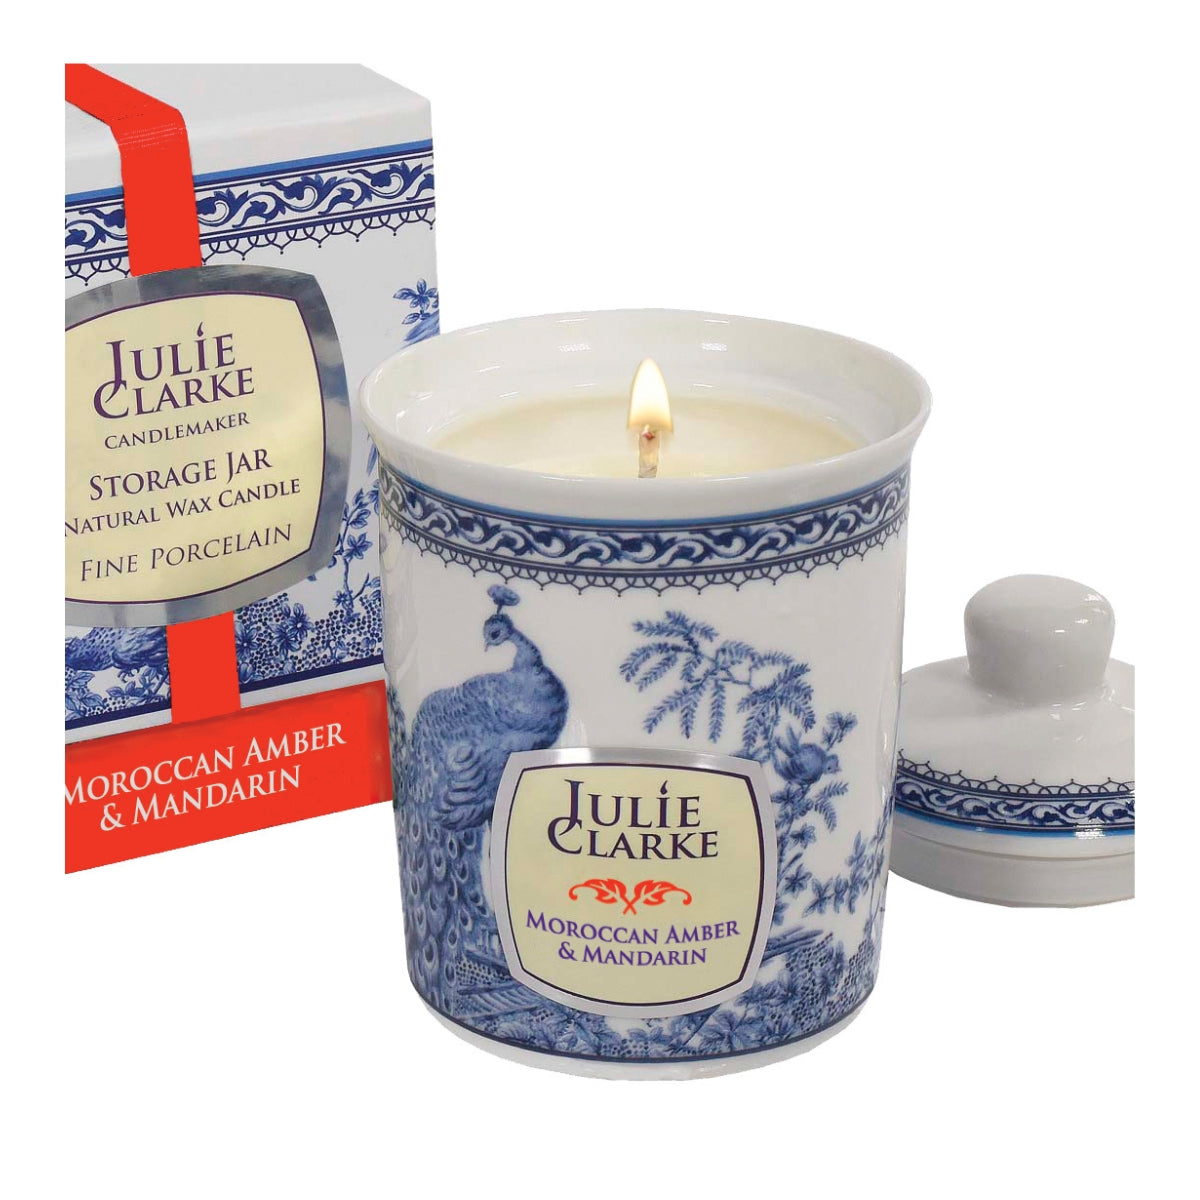 Julie Clarke Moroccan Amber and Mandarin Peacock Candle